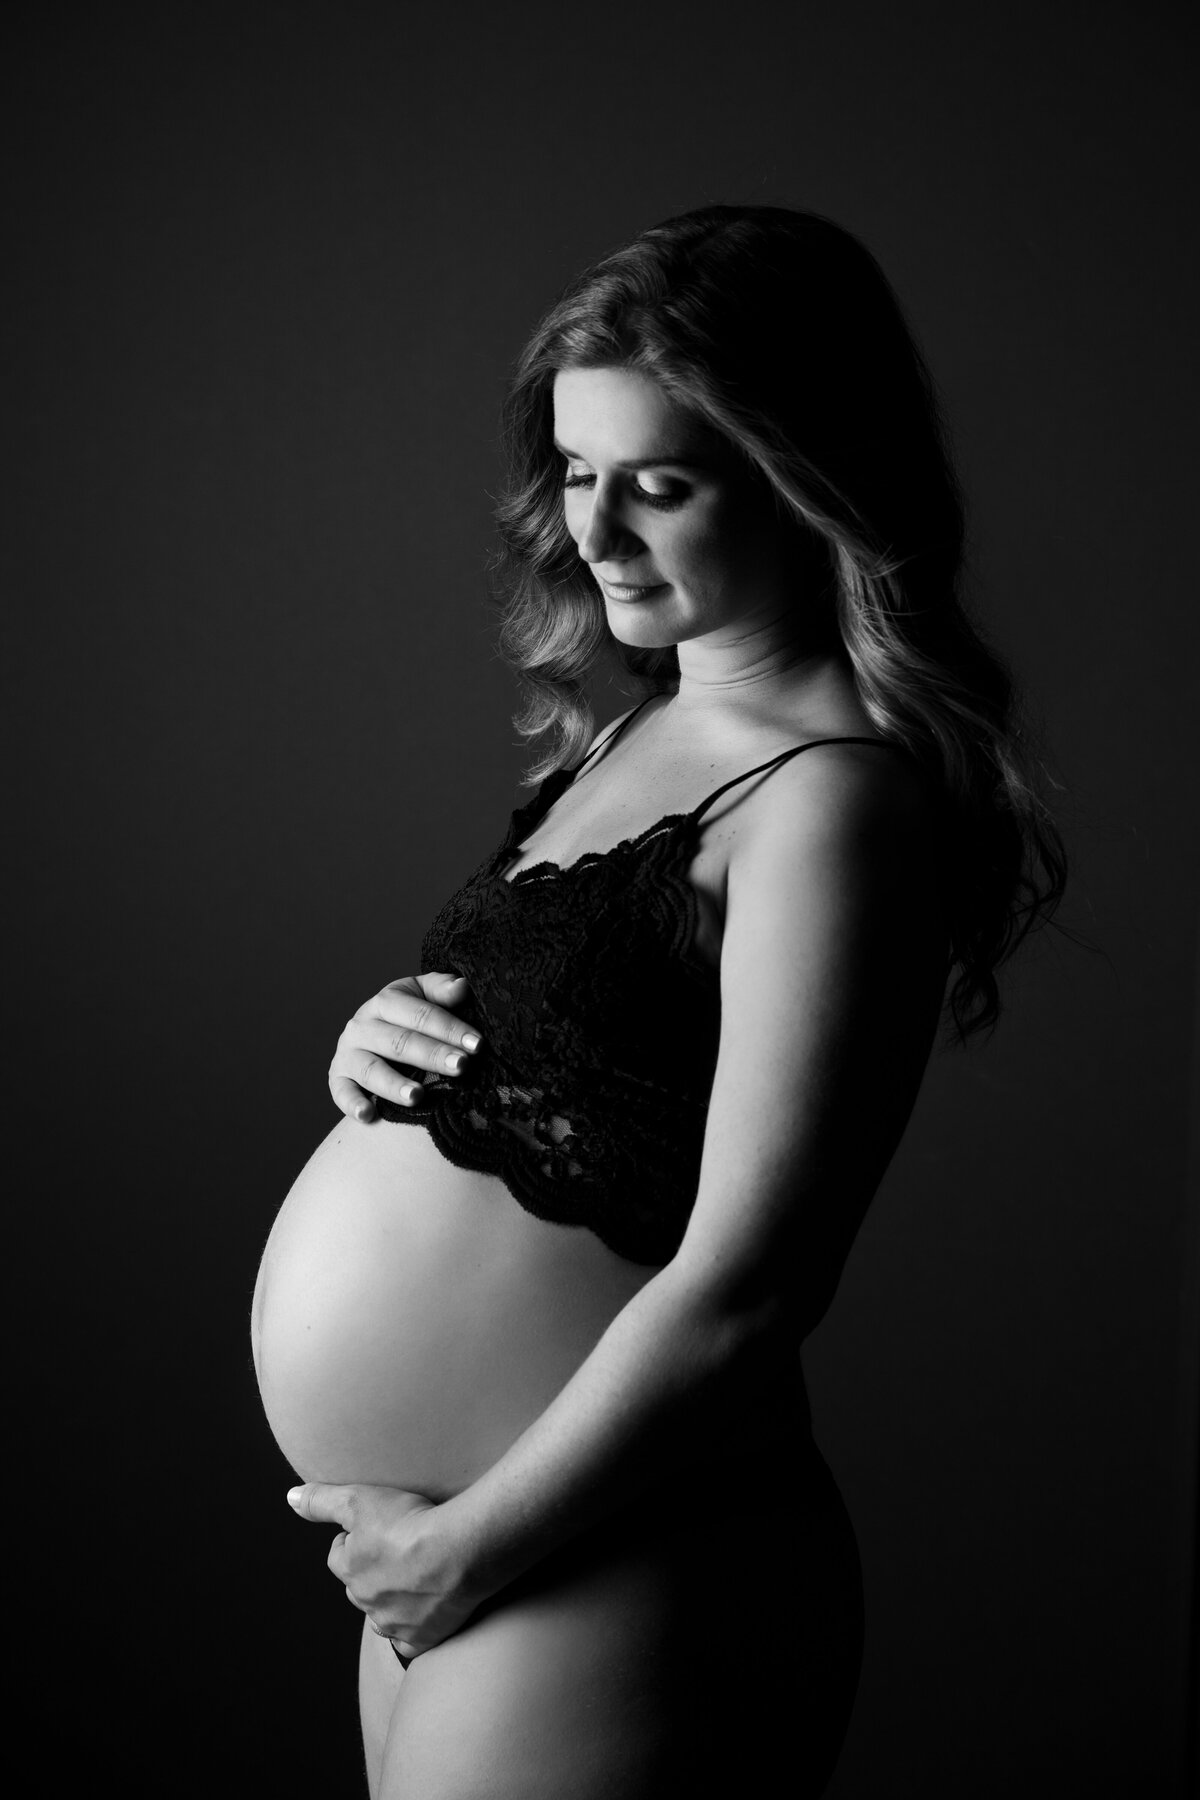 Black and white maternity photography nyc